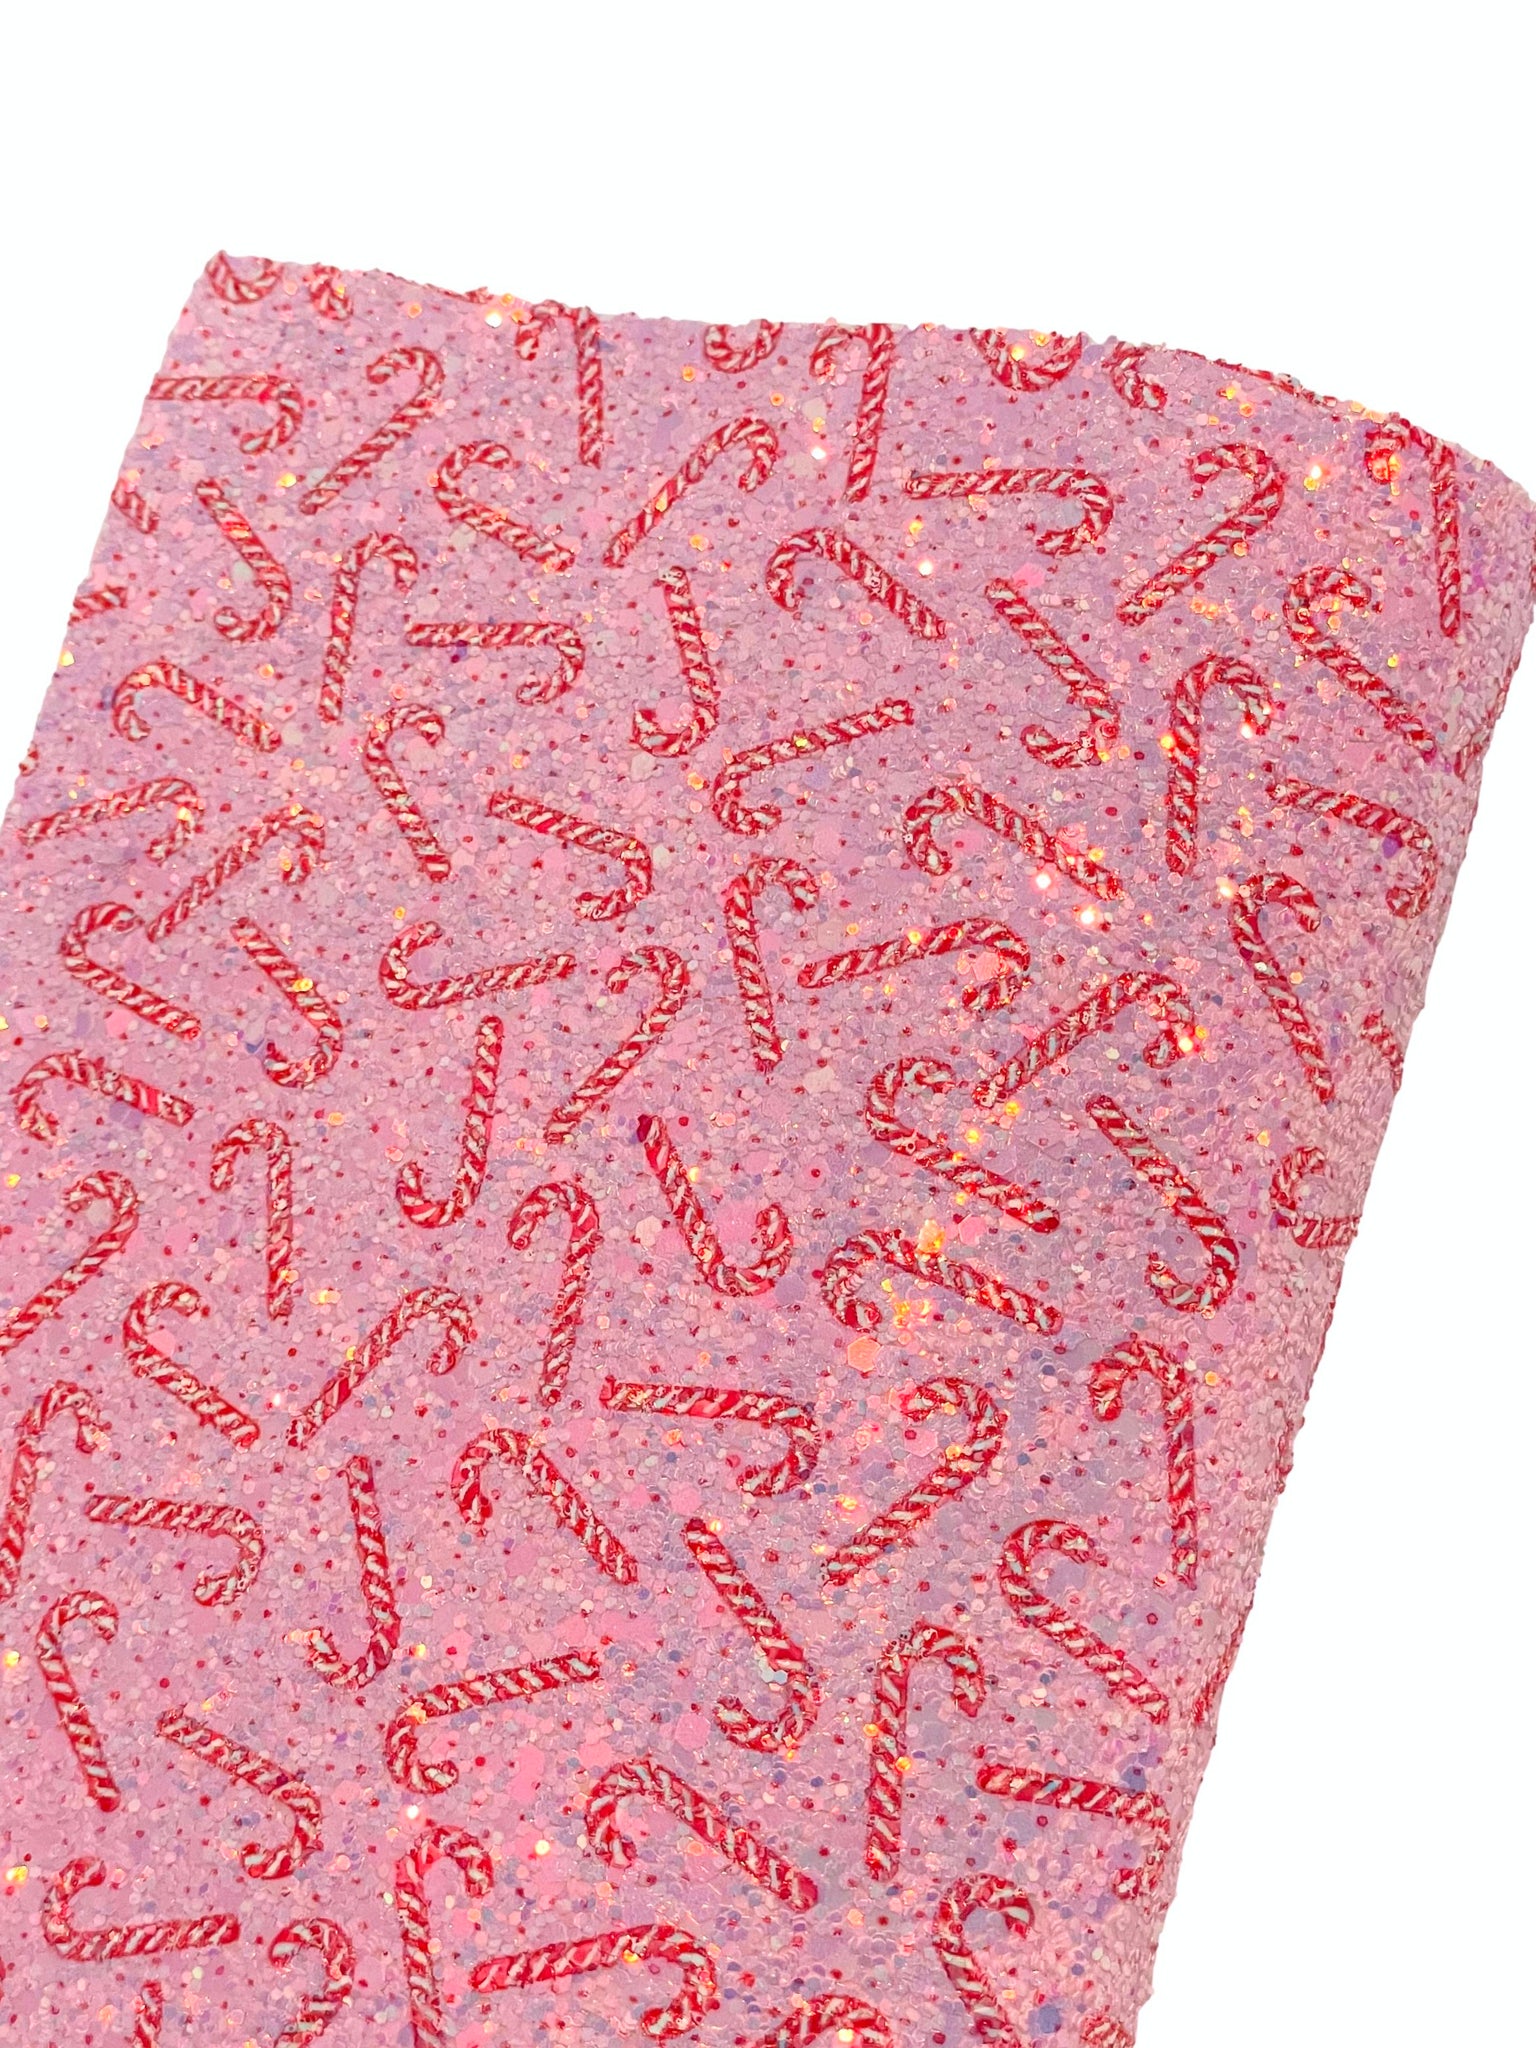 NEW! (PINK) Iridescent Candy Canes Chunky Glitter w/ Felt Backing-READY TO SHIP